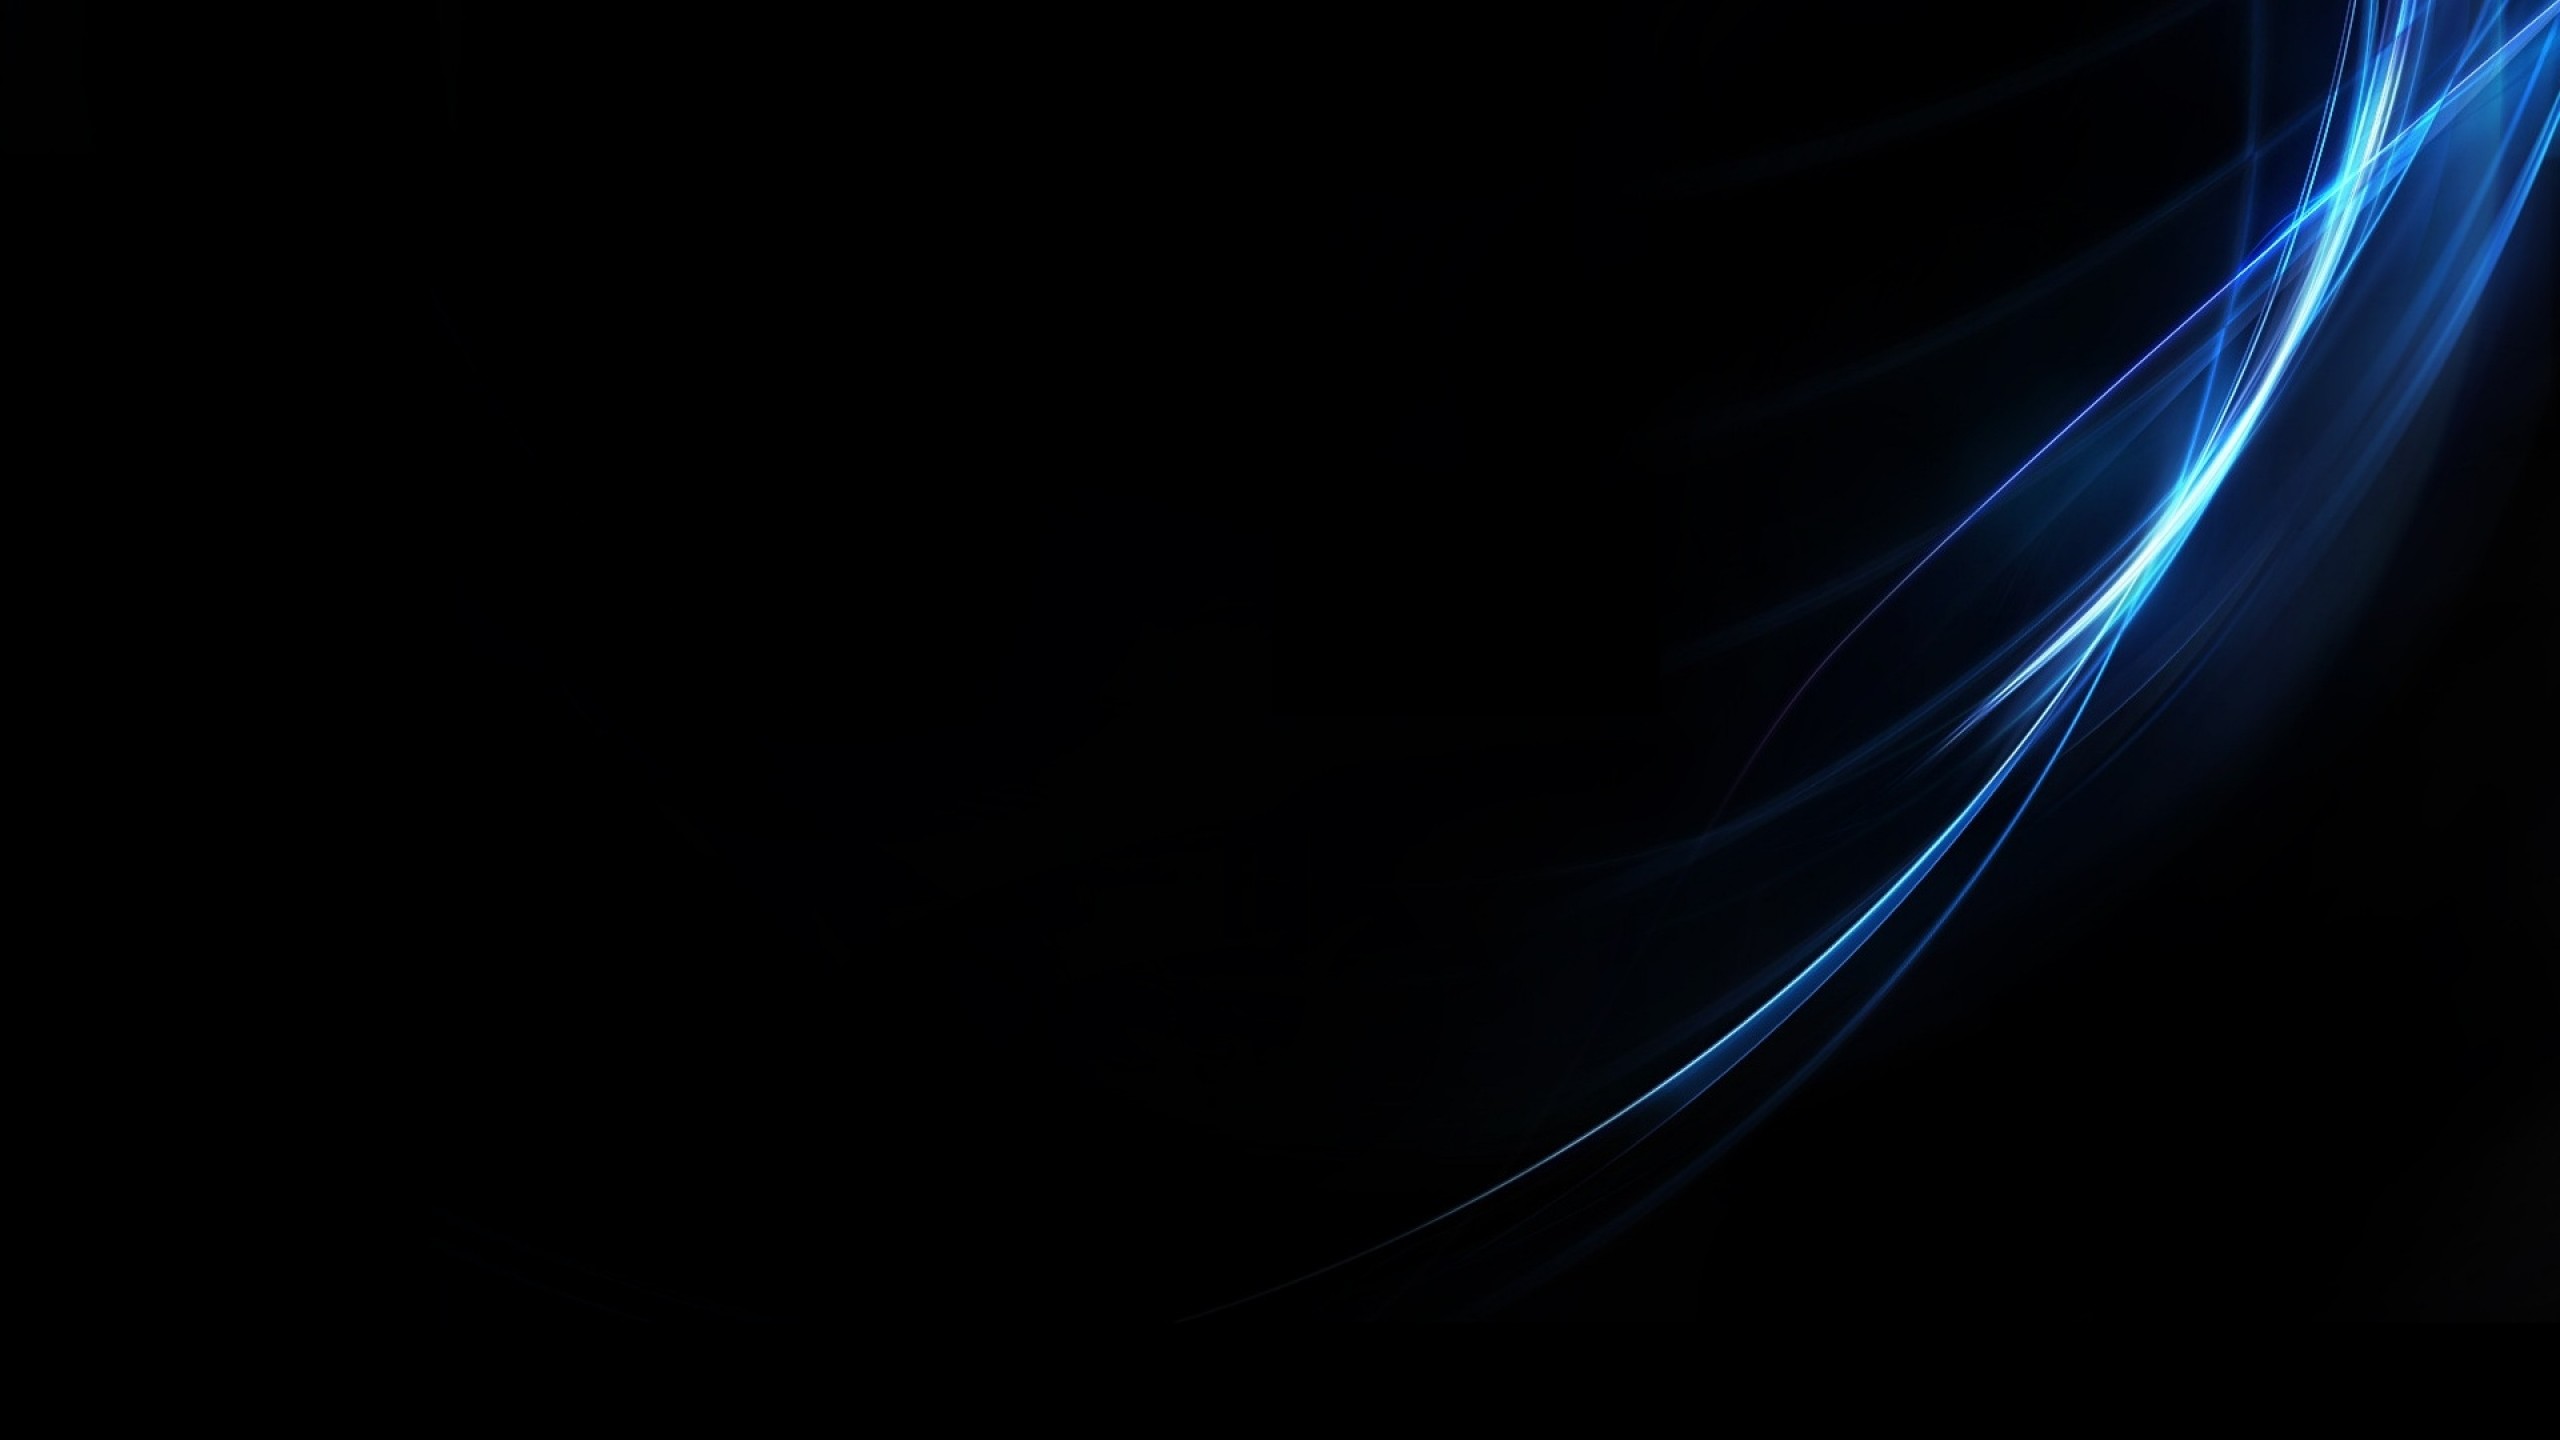 Black Abstract Windows 8.1 Wallpapers All for Windows 10 Free HTML